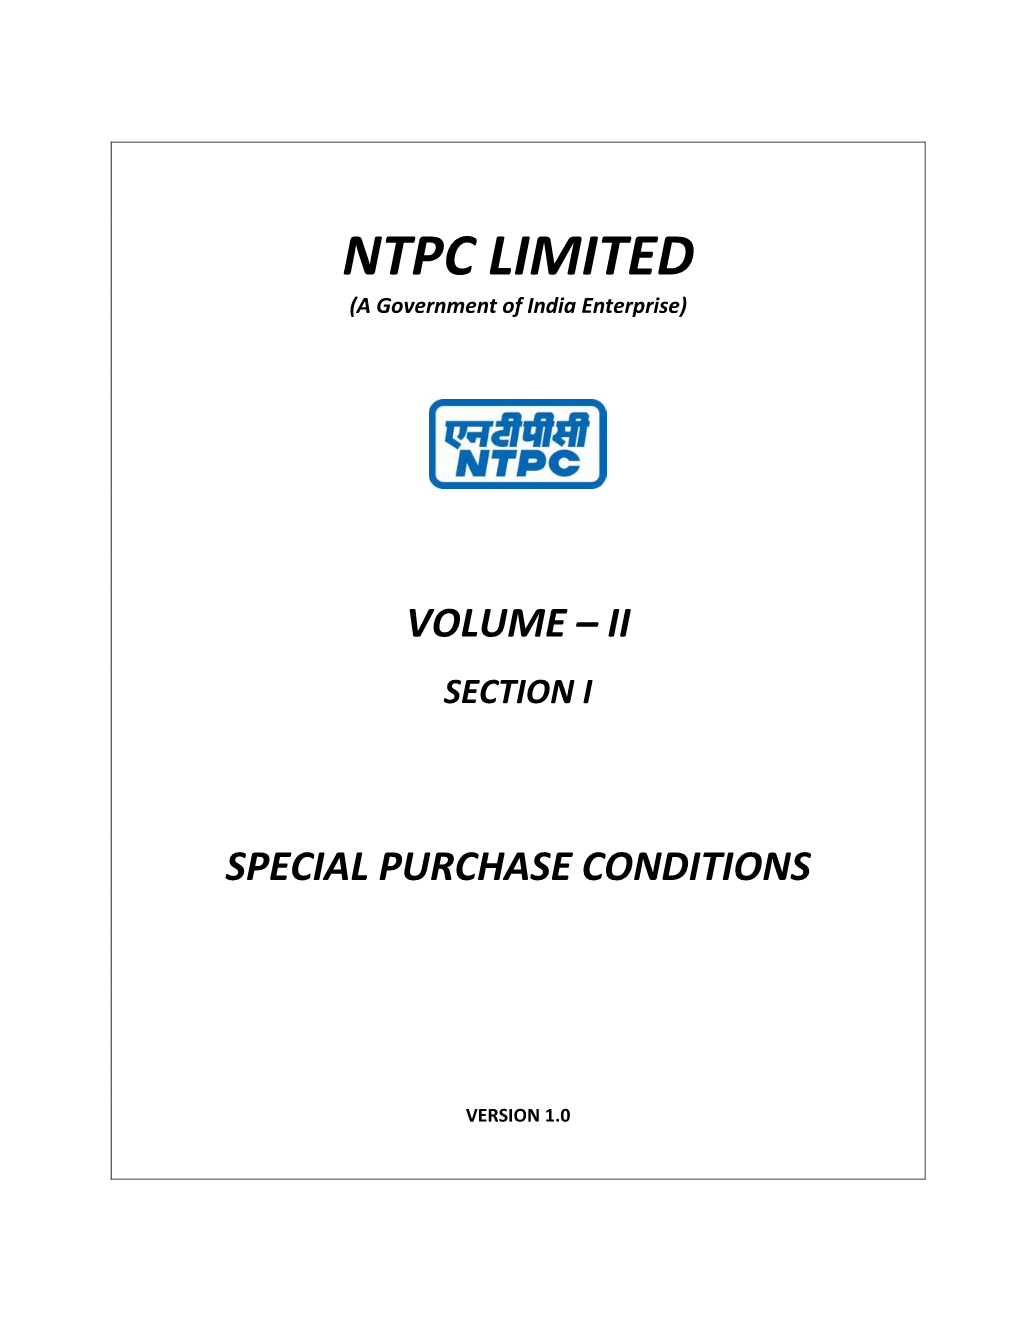 NTPC LIMITED (A Government of India Enterprise)